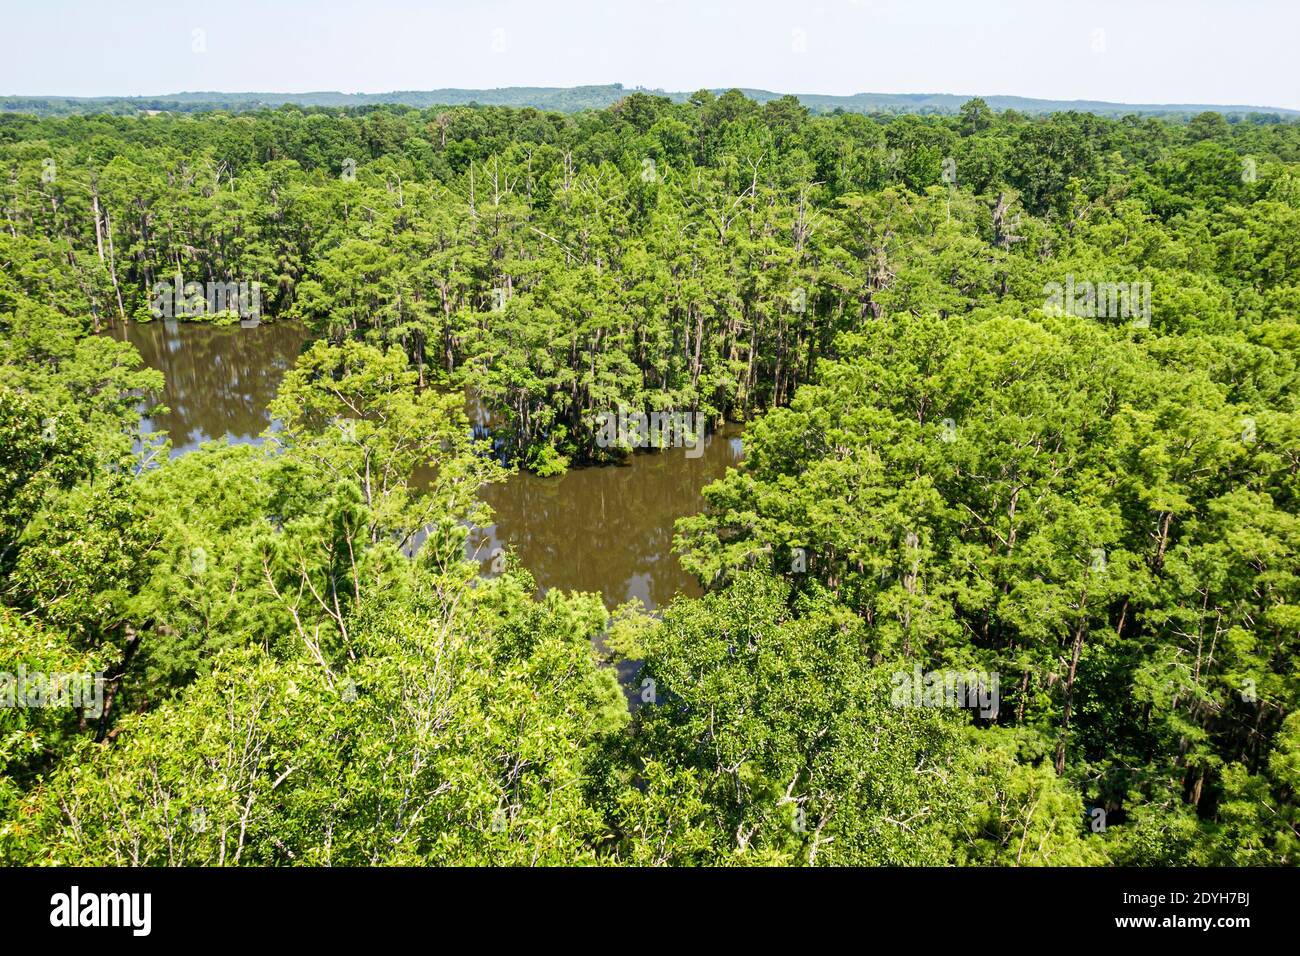 Alabama Marion Perry Lakes Park Vogelbeobachtungsturm Blick, Laubholz Aue Wald Bäume Oxbow See, Stockfoto